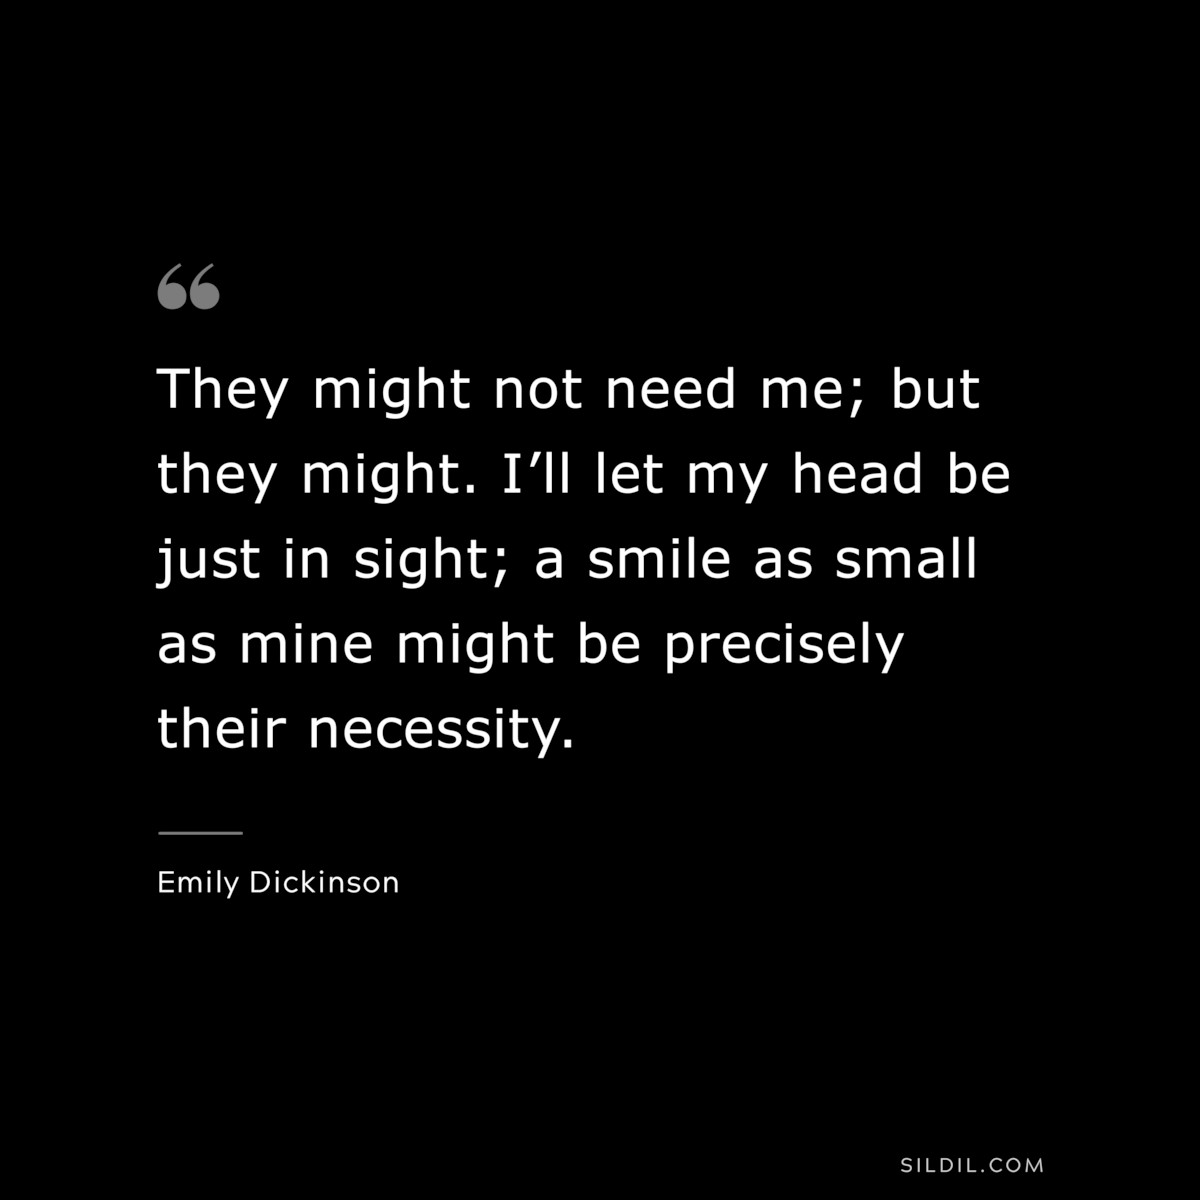 They might not need me; but they might. I’ll let my head be just in sight; a smile as small as mine might be precisely their necessity.